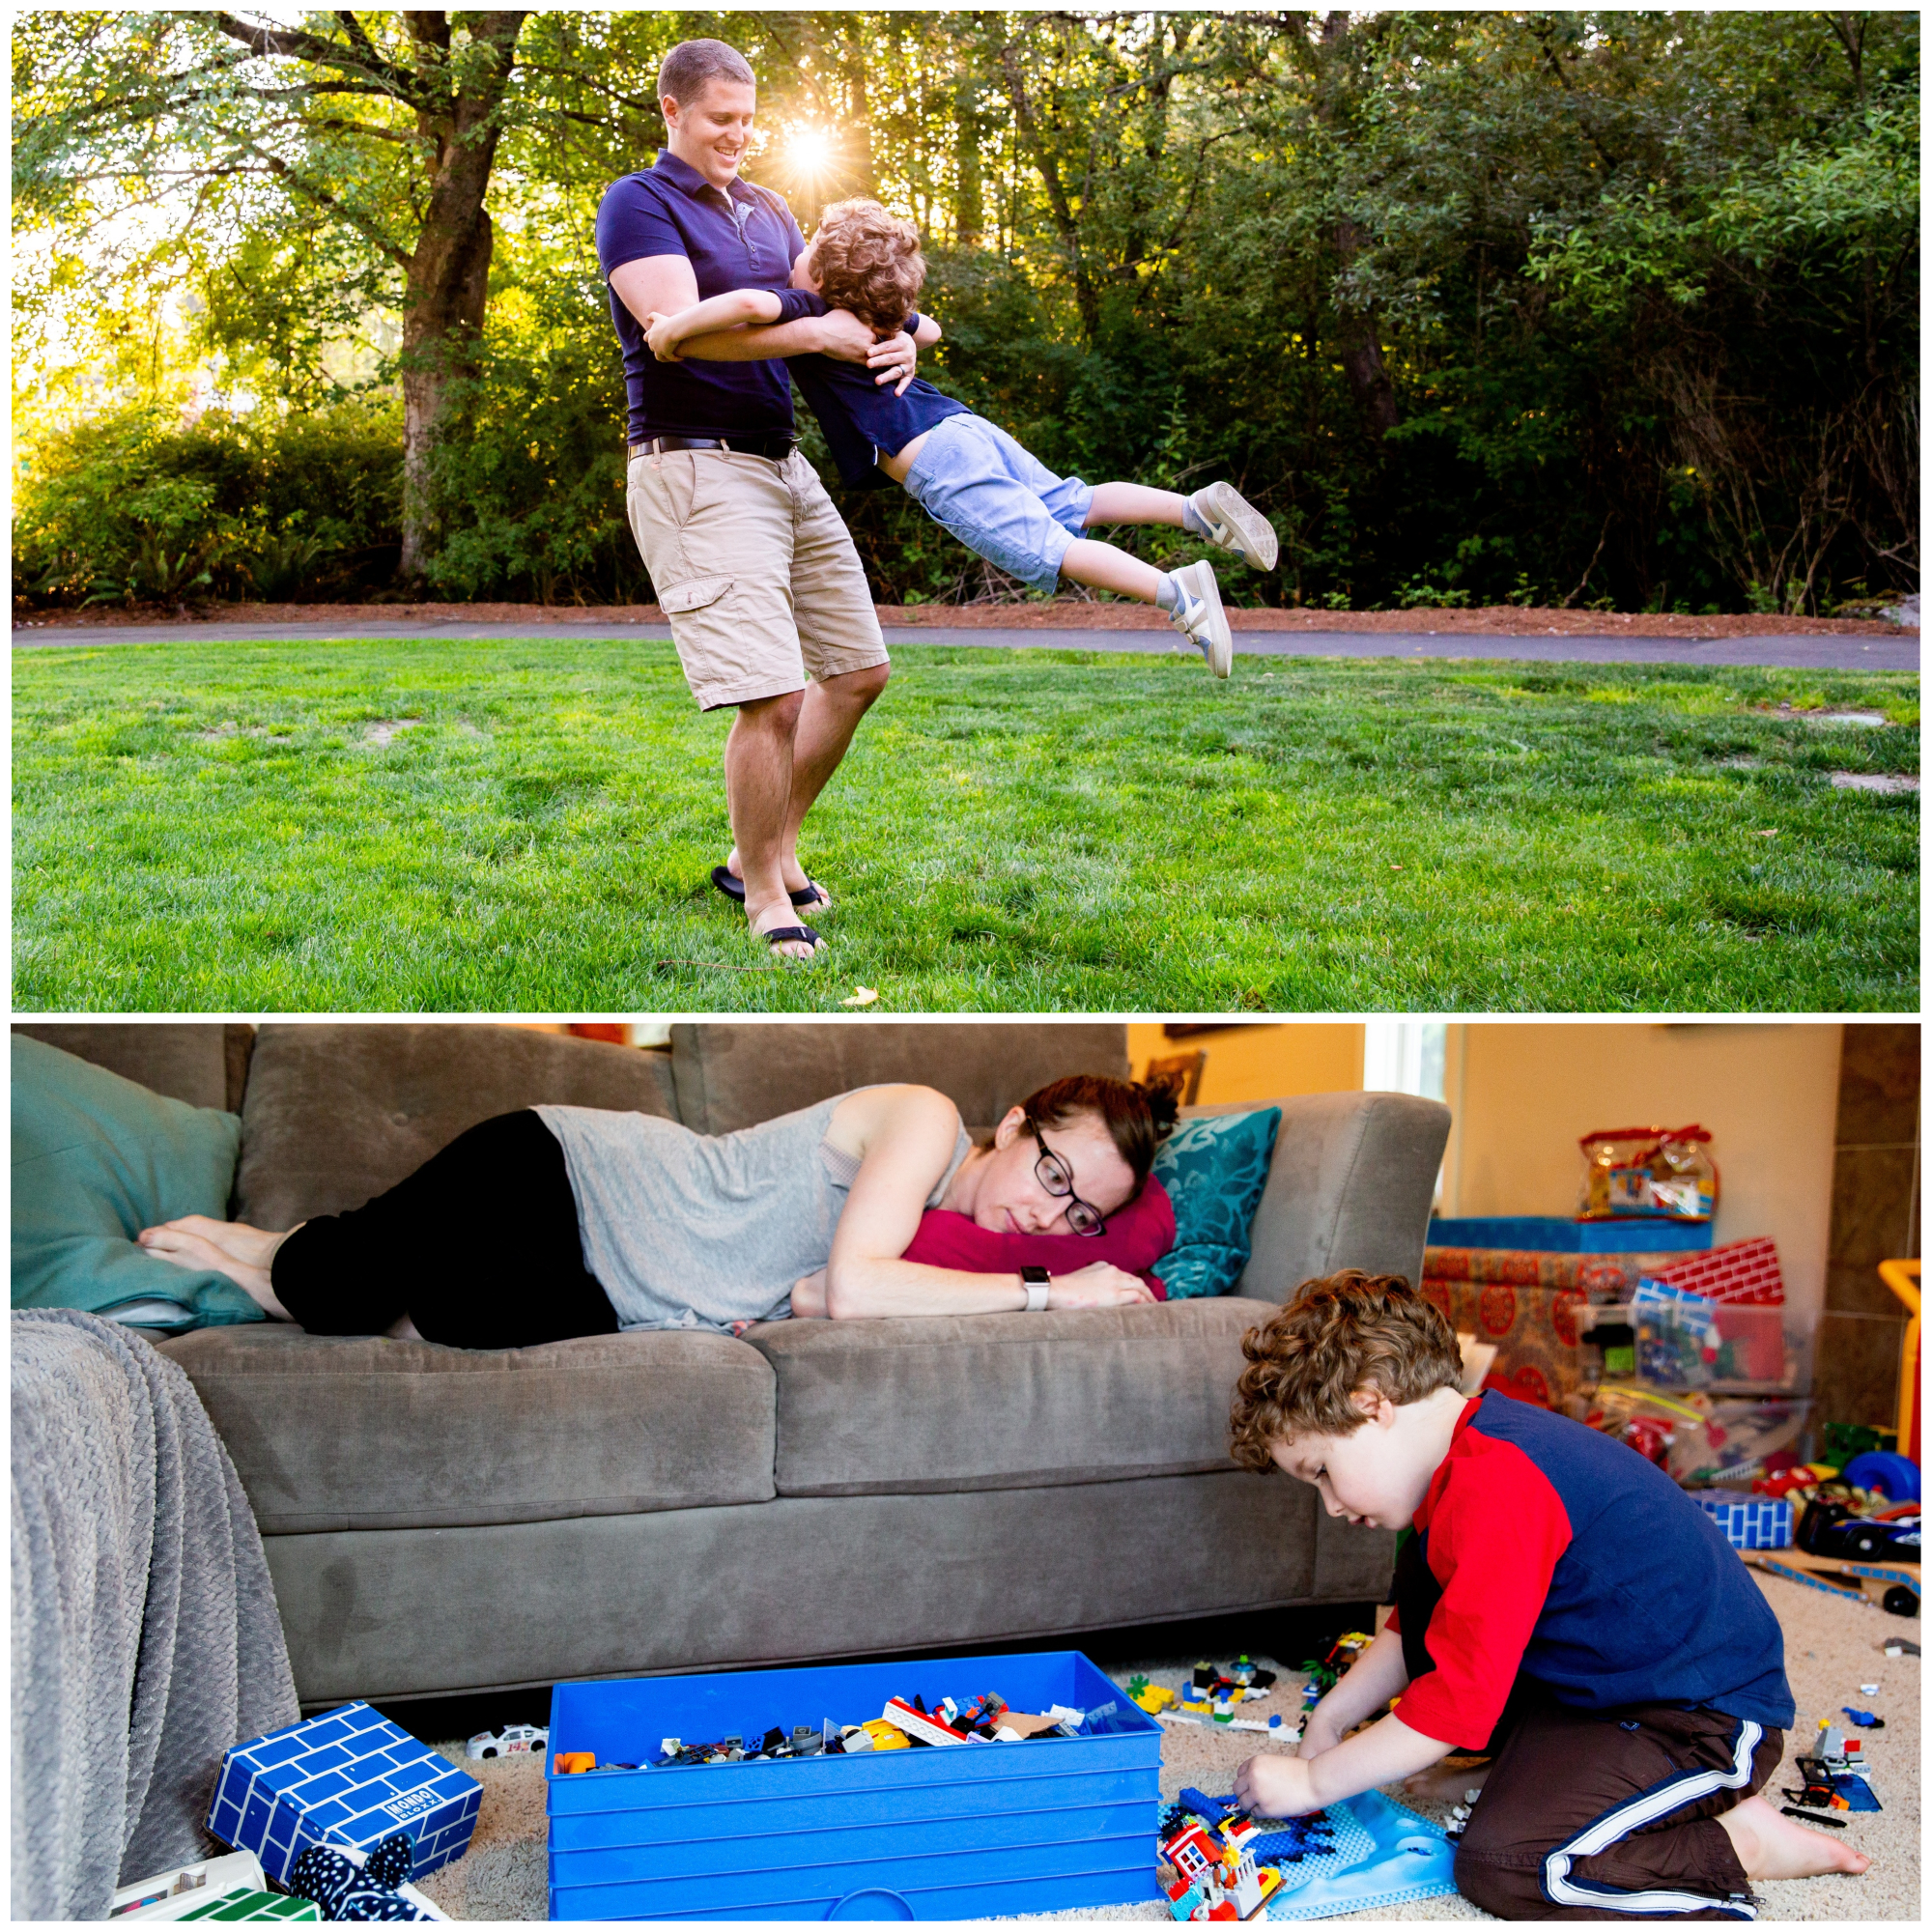 On top, my husband plays athletically with Charlie in the style I always imagined myself playing before I got sick. It is a beautiful sunny day and a strong man (my husband) is swinging our son around. On the bottom, I am laying on the couch watching charlie play with Legos.